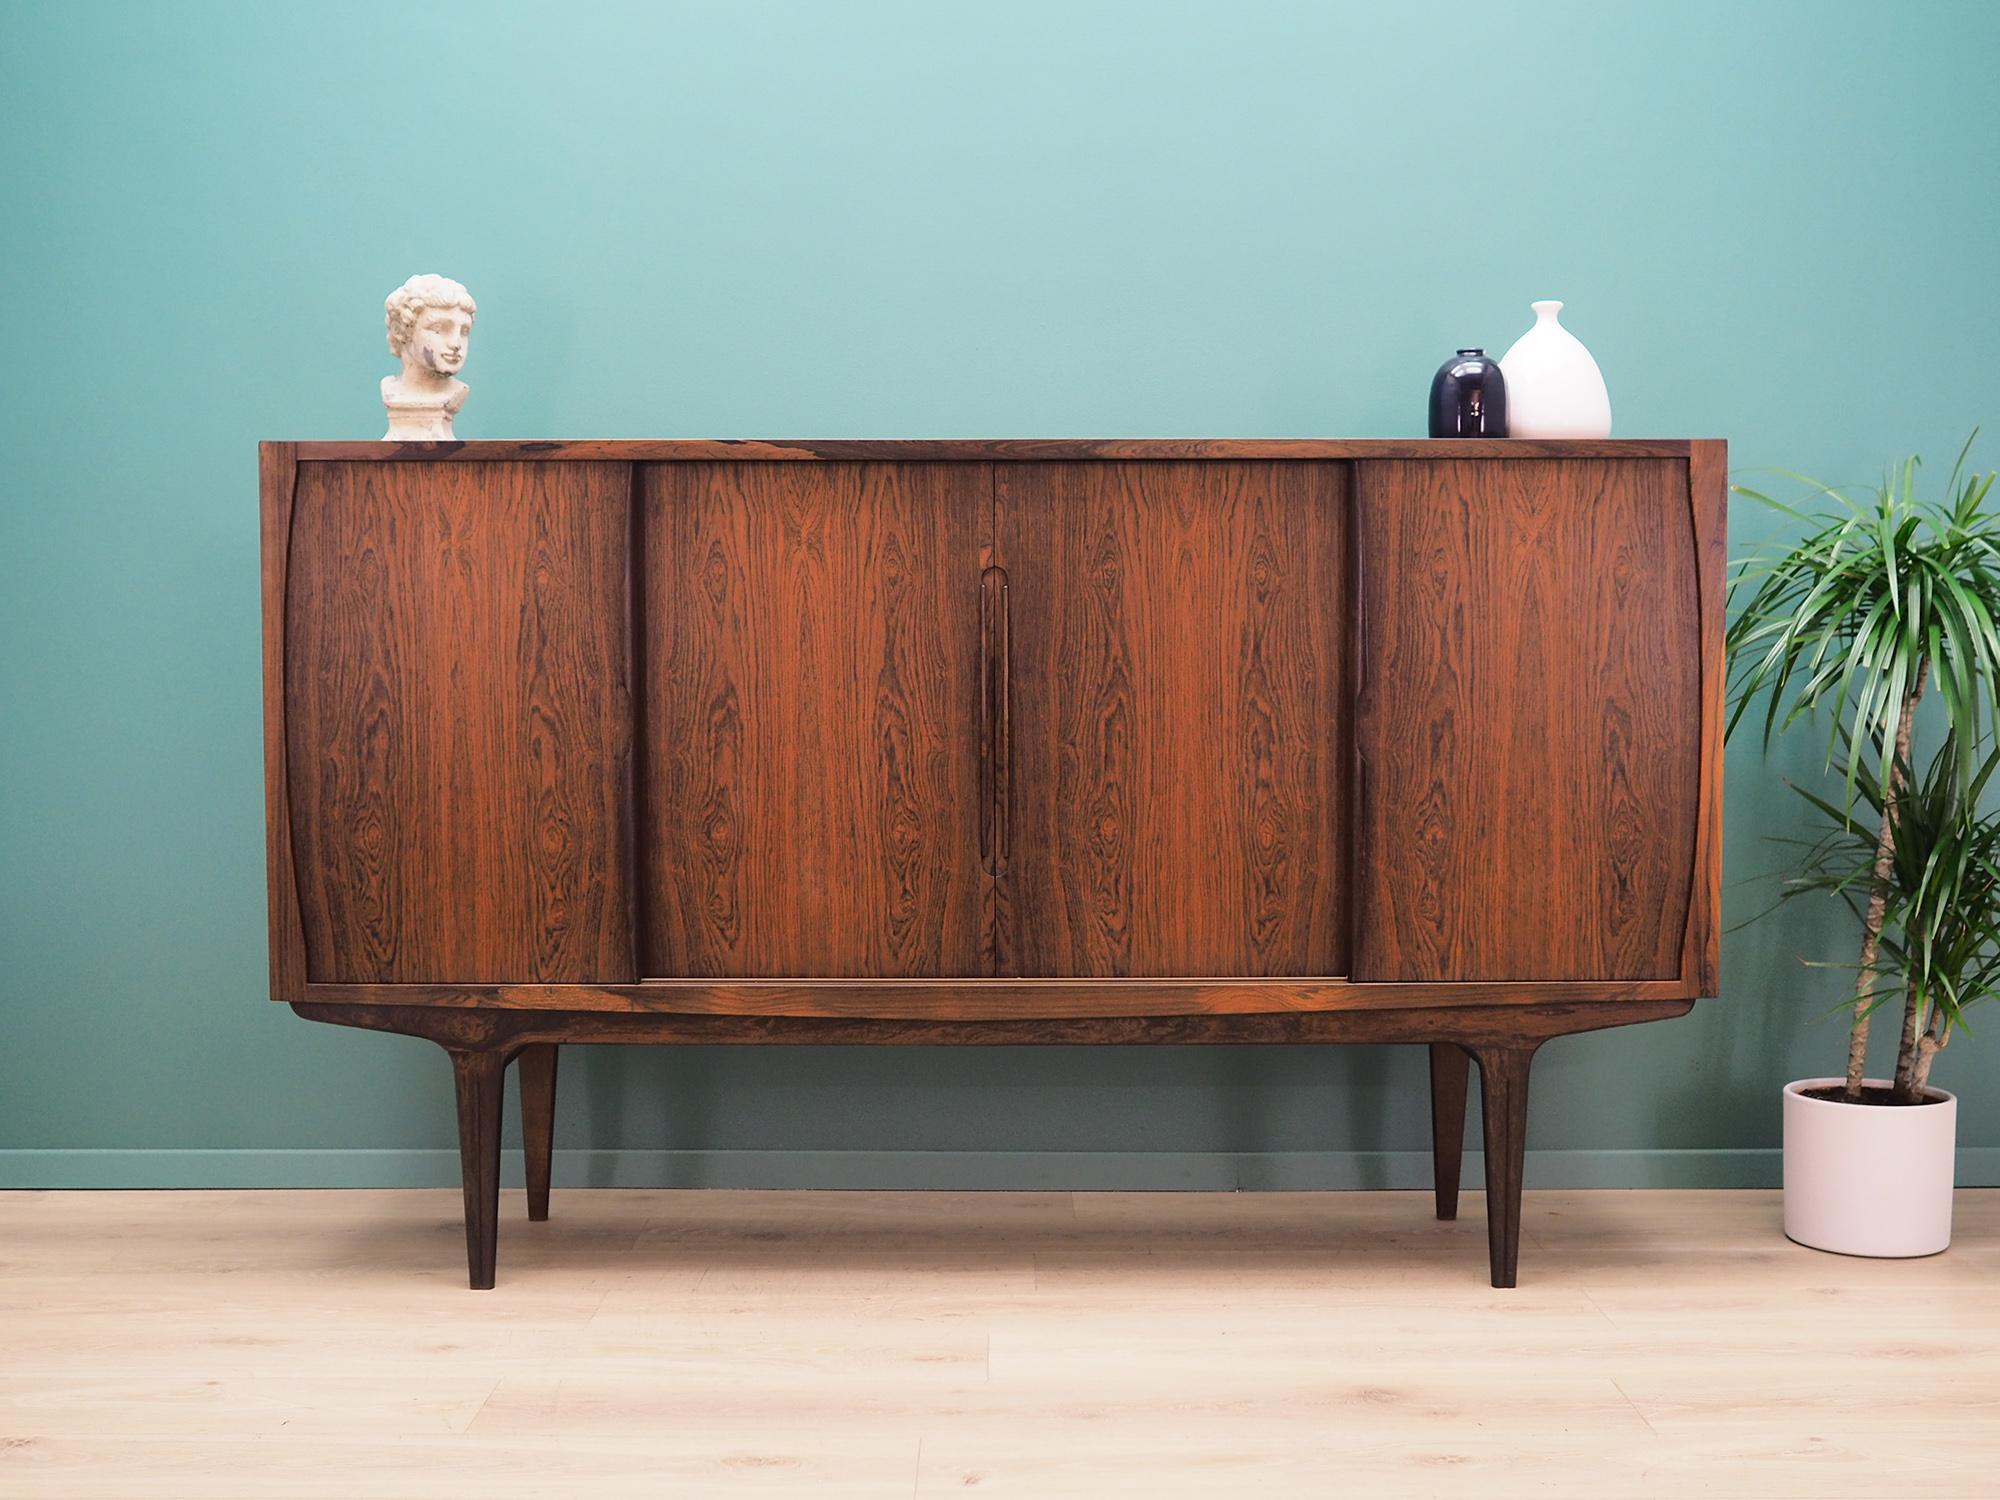 Highboard was made in the 1970s, Danish production.

The structure is covered with rosewood veneer. The legs and handles are made of solid rosewood. The surface after refreshing. Inside the space has been filled with practical shelves with height